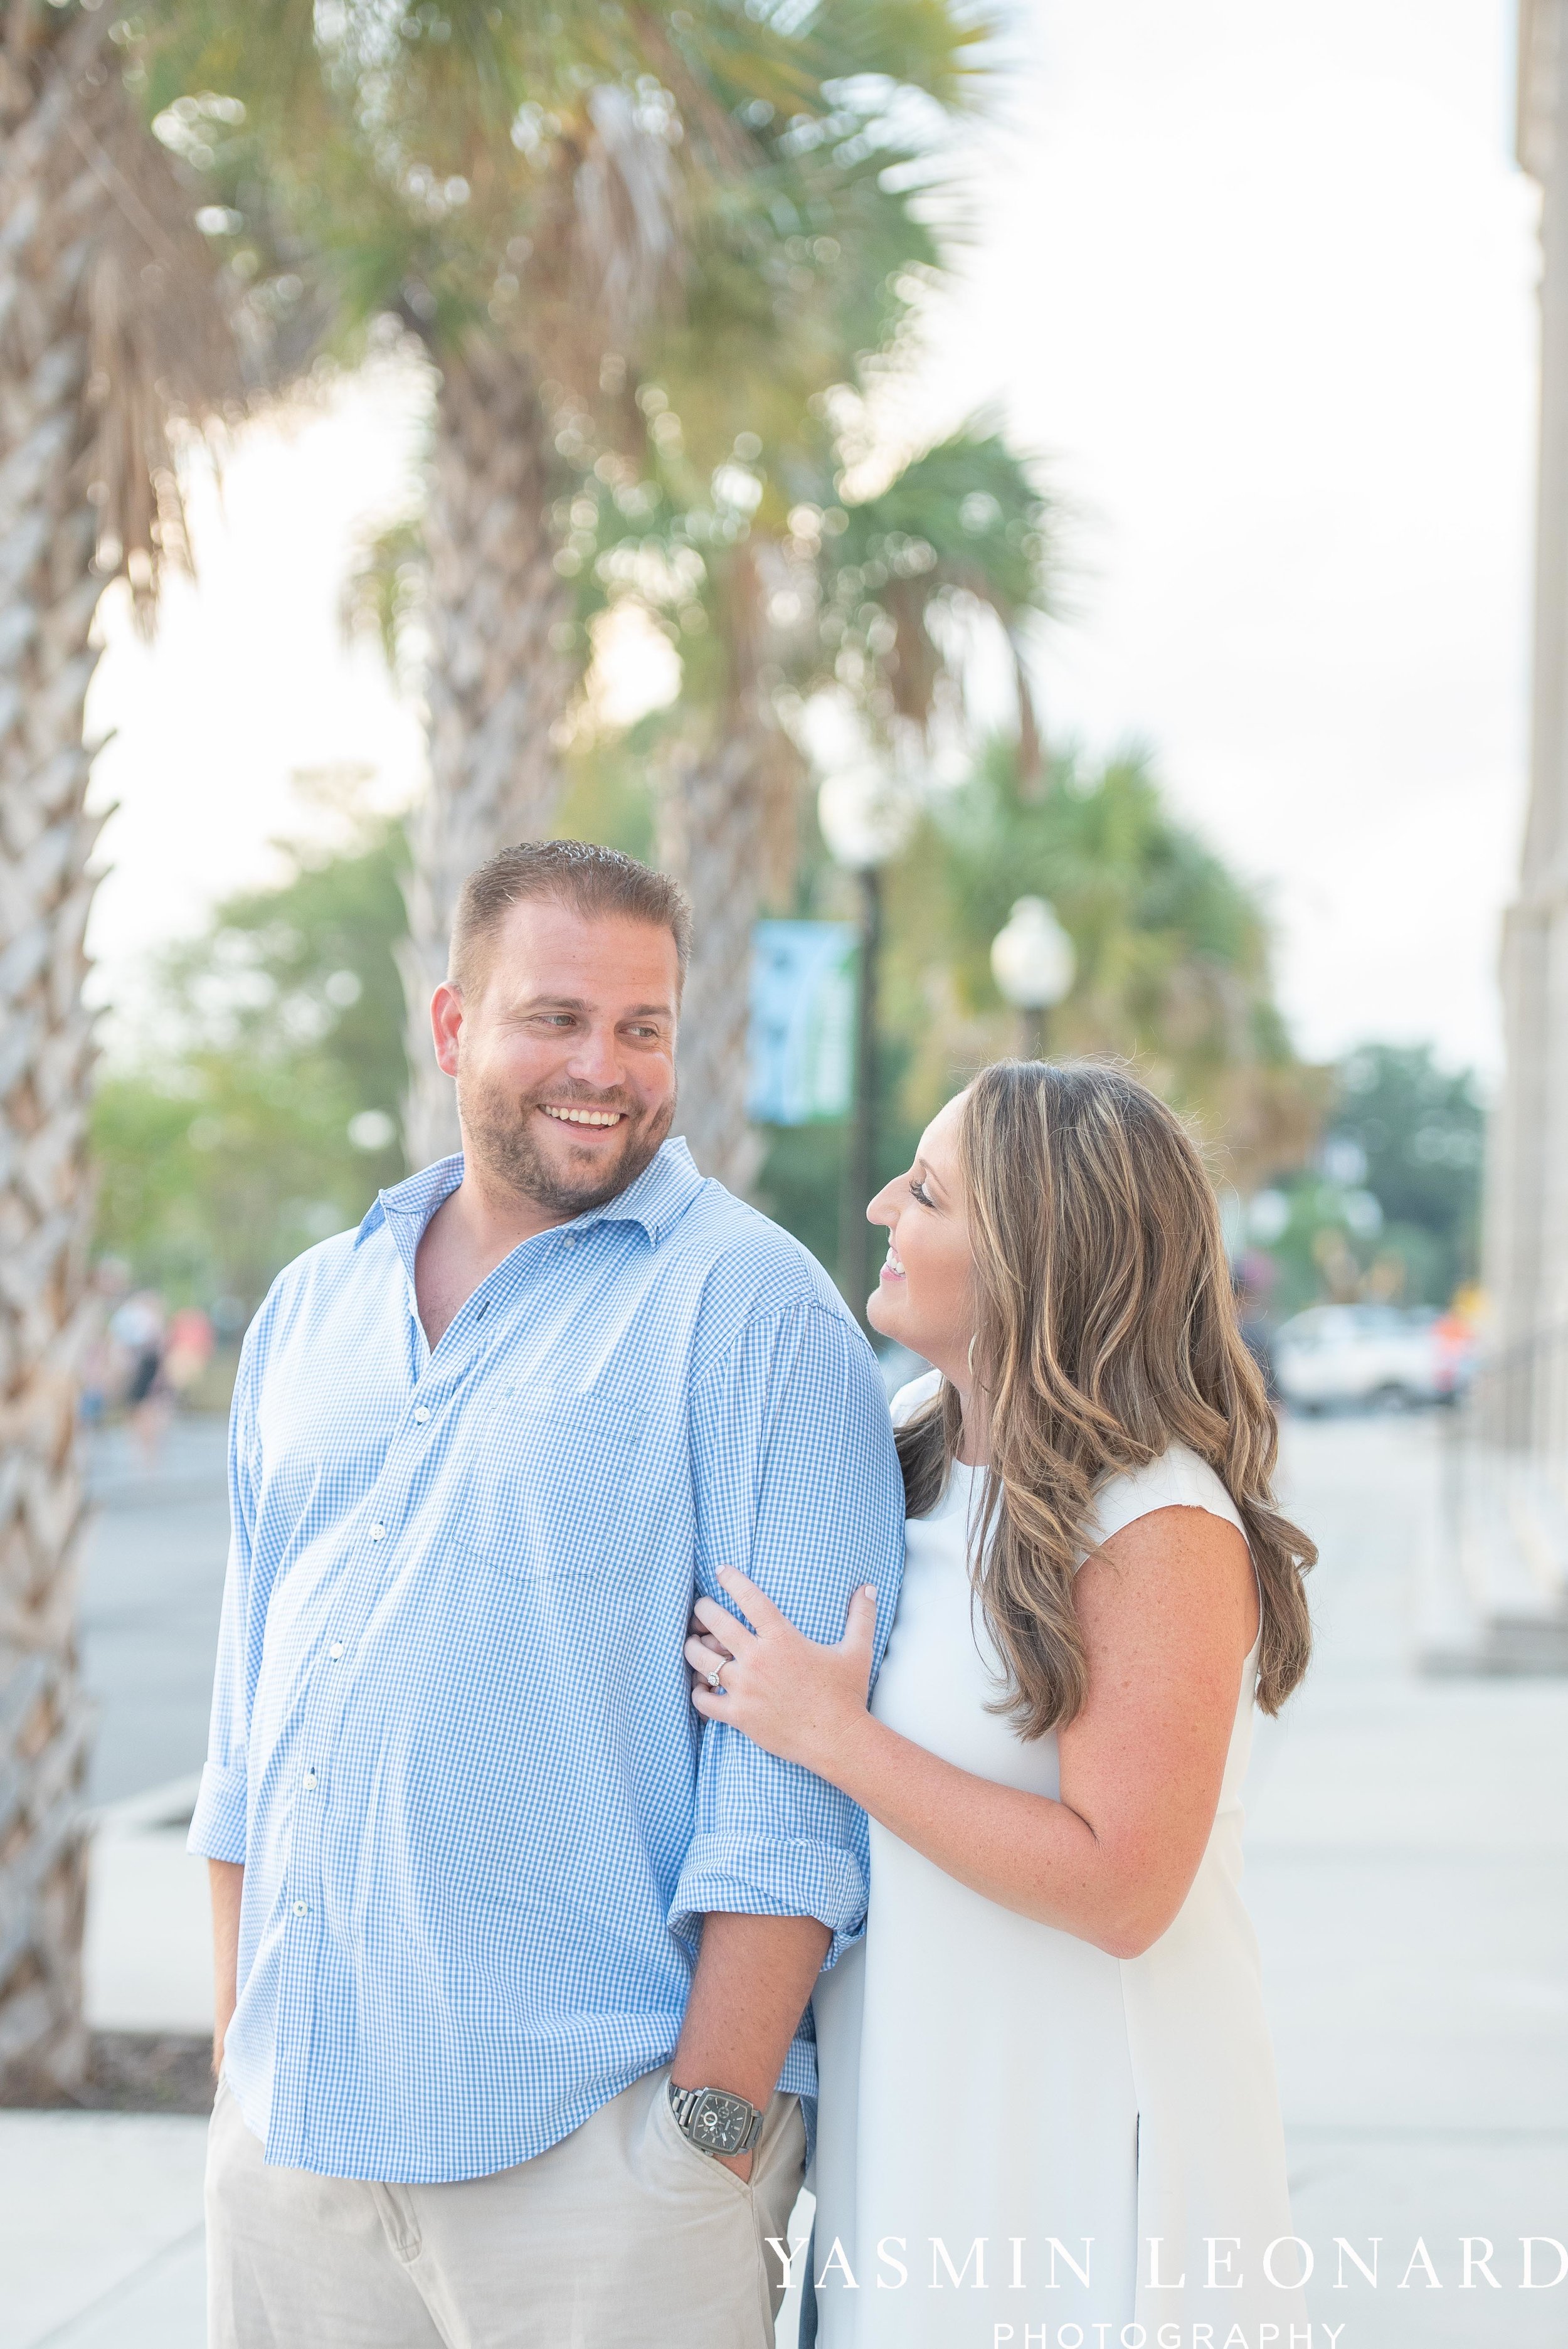 Wrightsville Beach Engagement Session - Wilmington Engagement Session - Downtown Wilmington Engagement Session - NC Weddings - Wilmington NC - Yasmin Leonard Photography-8.jpg